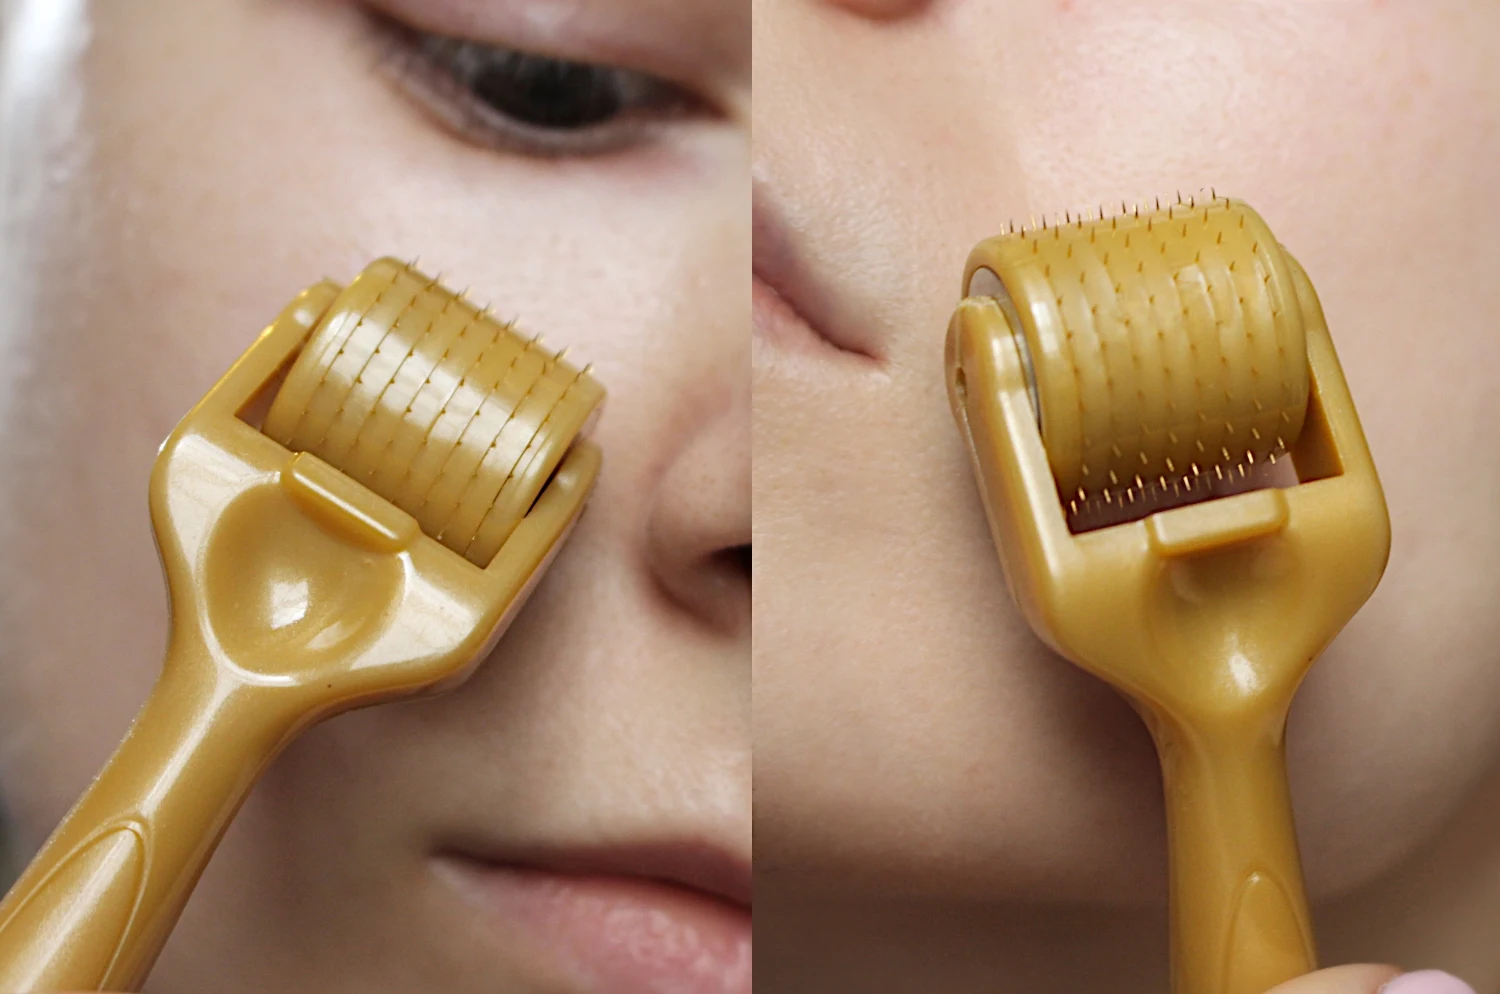 a close-up of a face skin and derma roller tool toching it